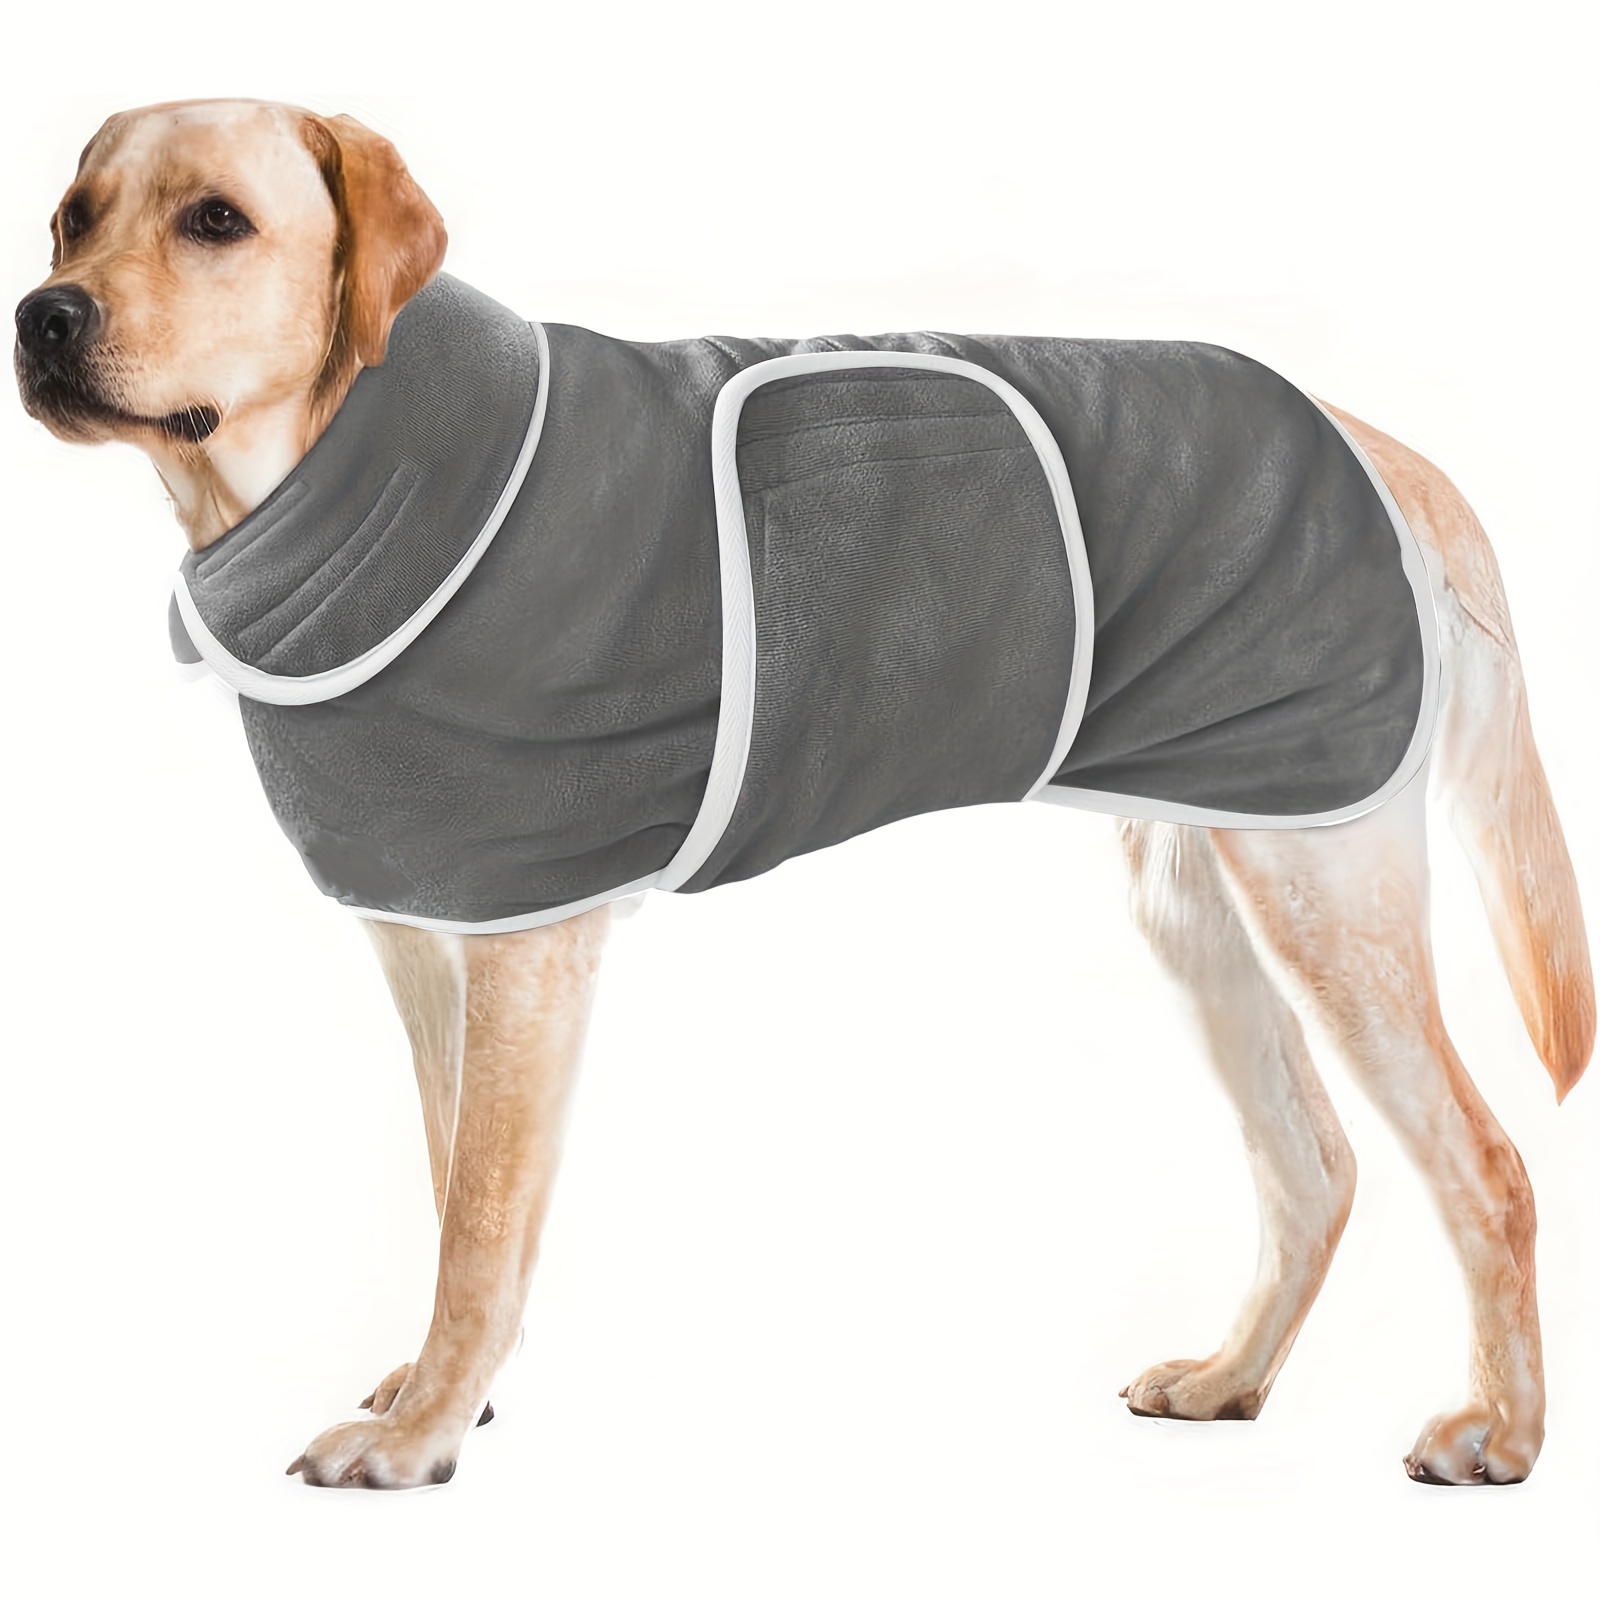 

Quick Drying Dog Bathrobe, Ultra Soft Comfortable Dog Towel, Super Absorbent Pet Puppy Bathrobe, With Adjustable Belly Strap